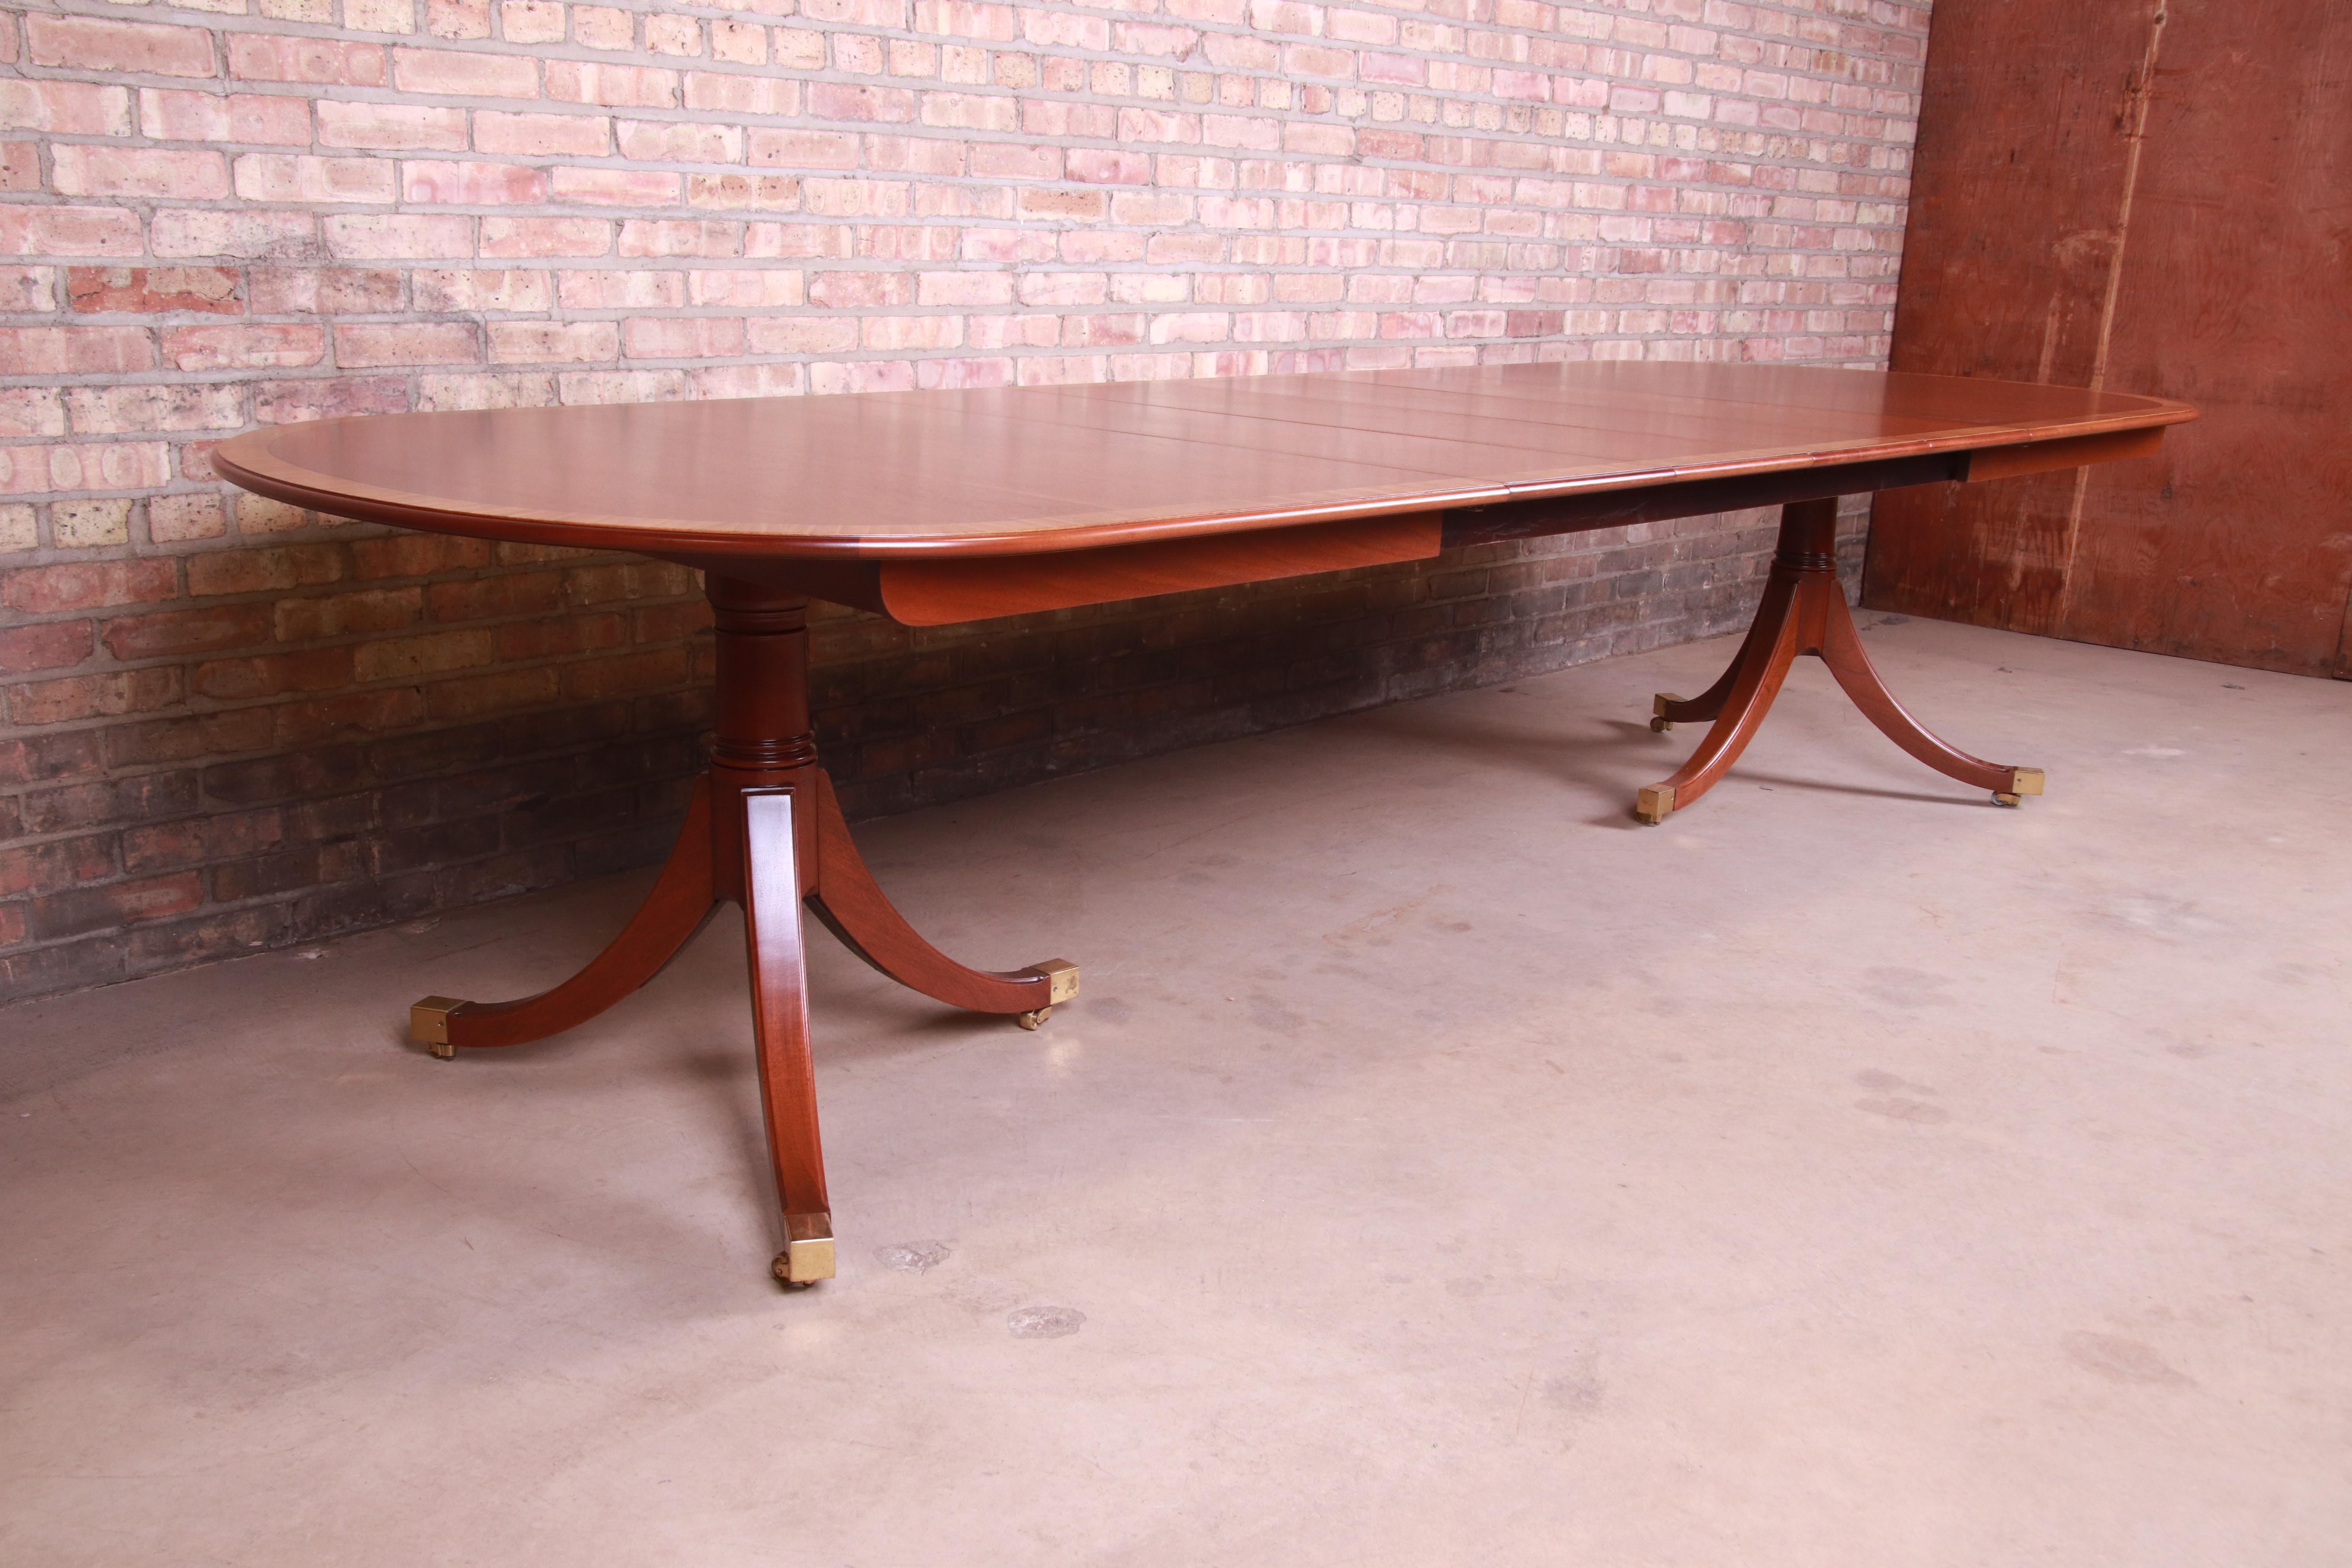 20th Century Kindel Furniture Georgian Mahogany Double Pedestal Dining Table, Refinished